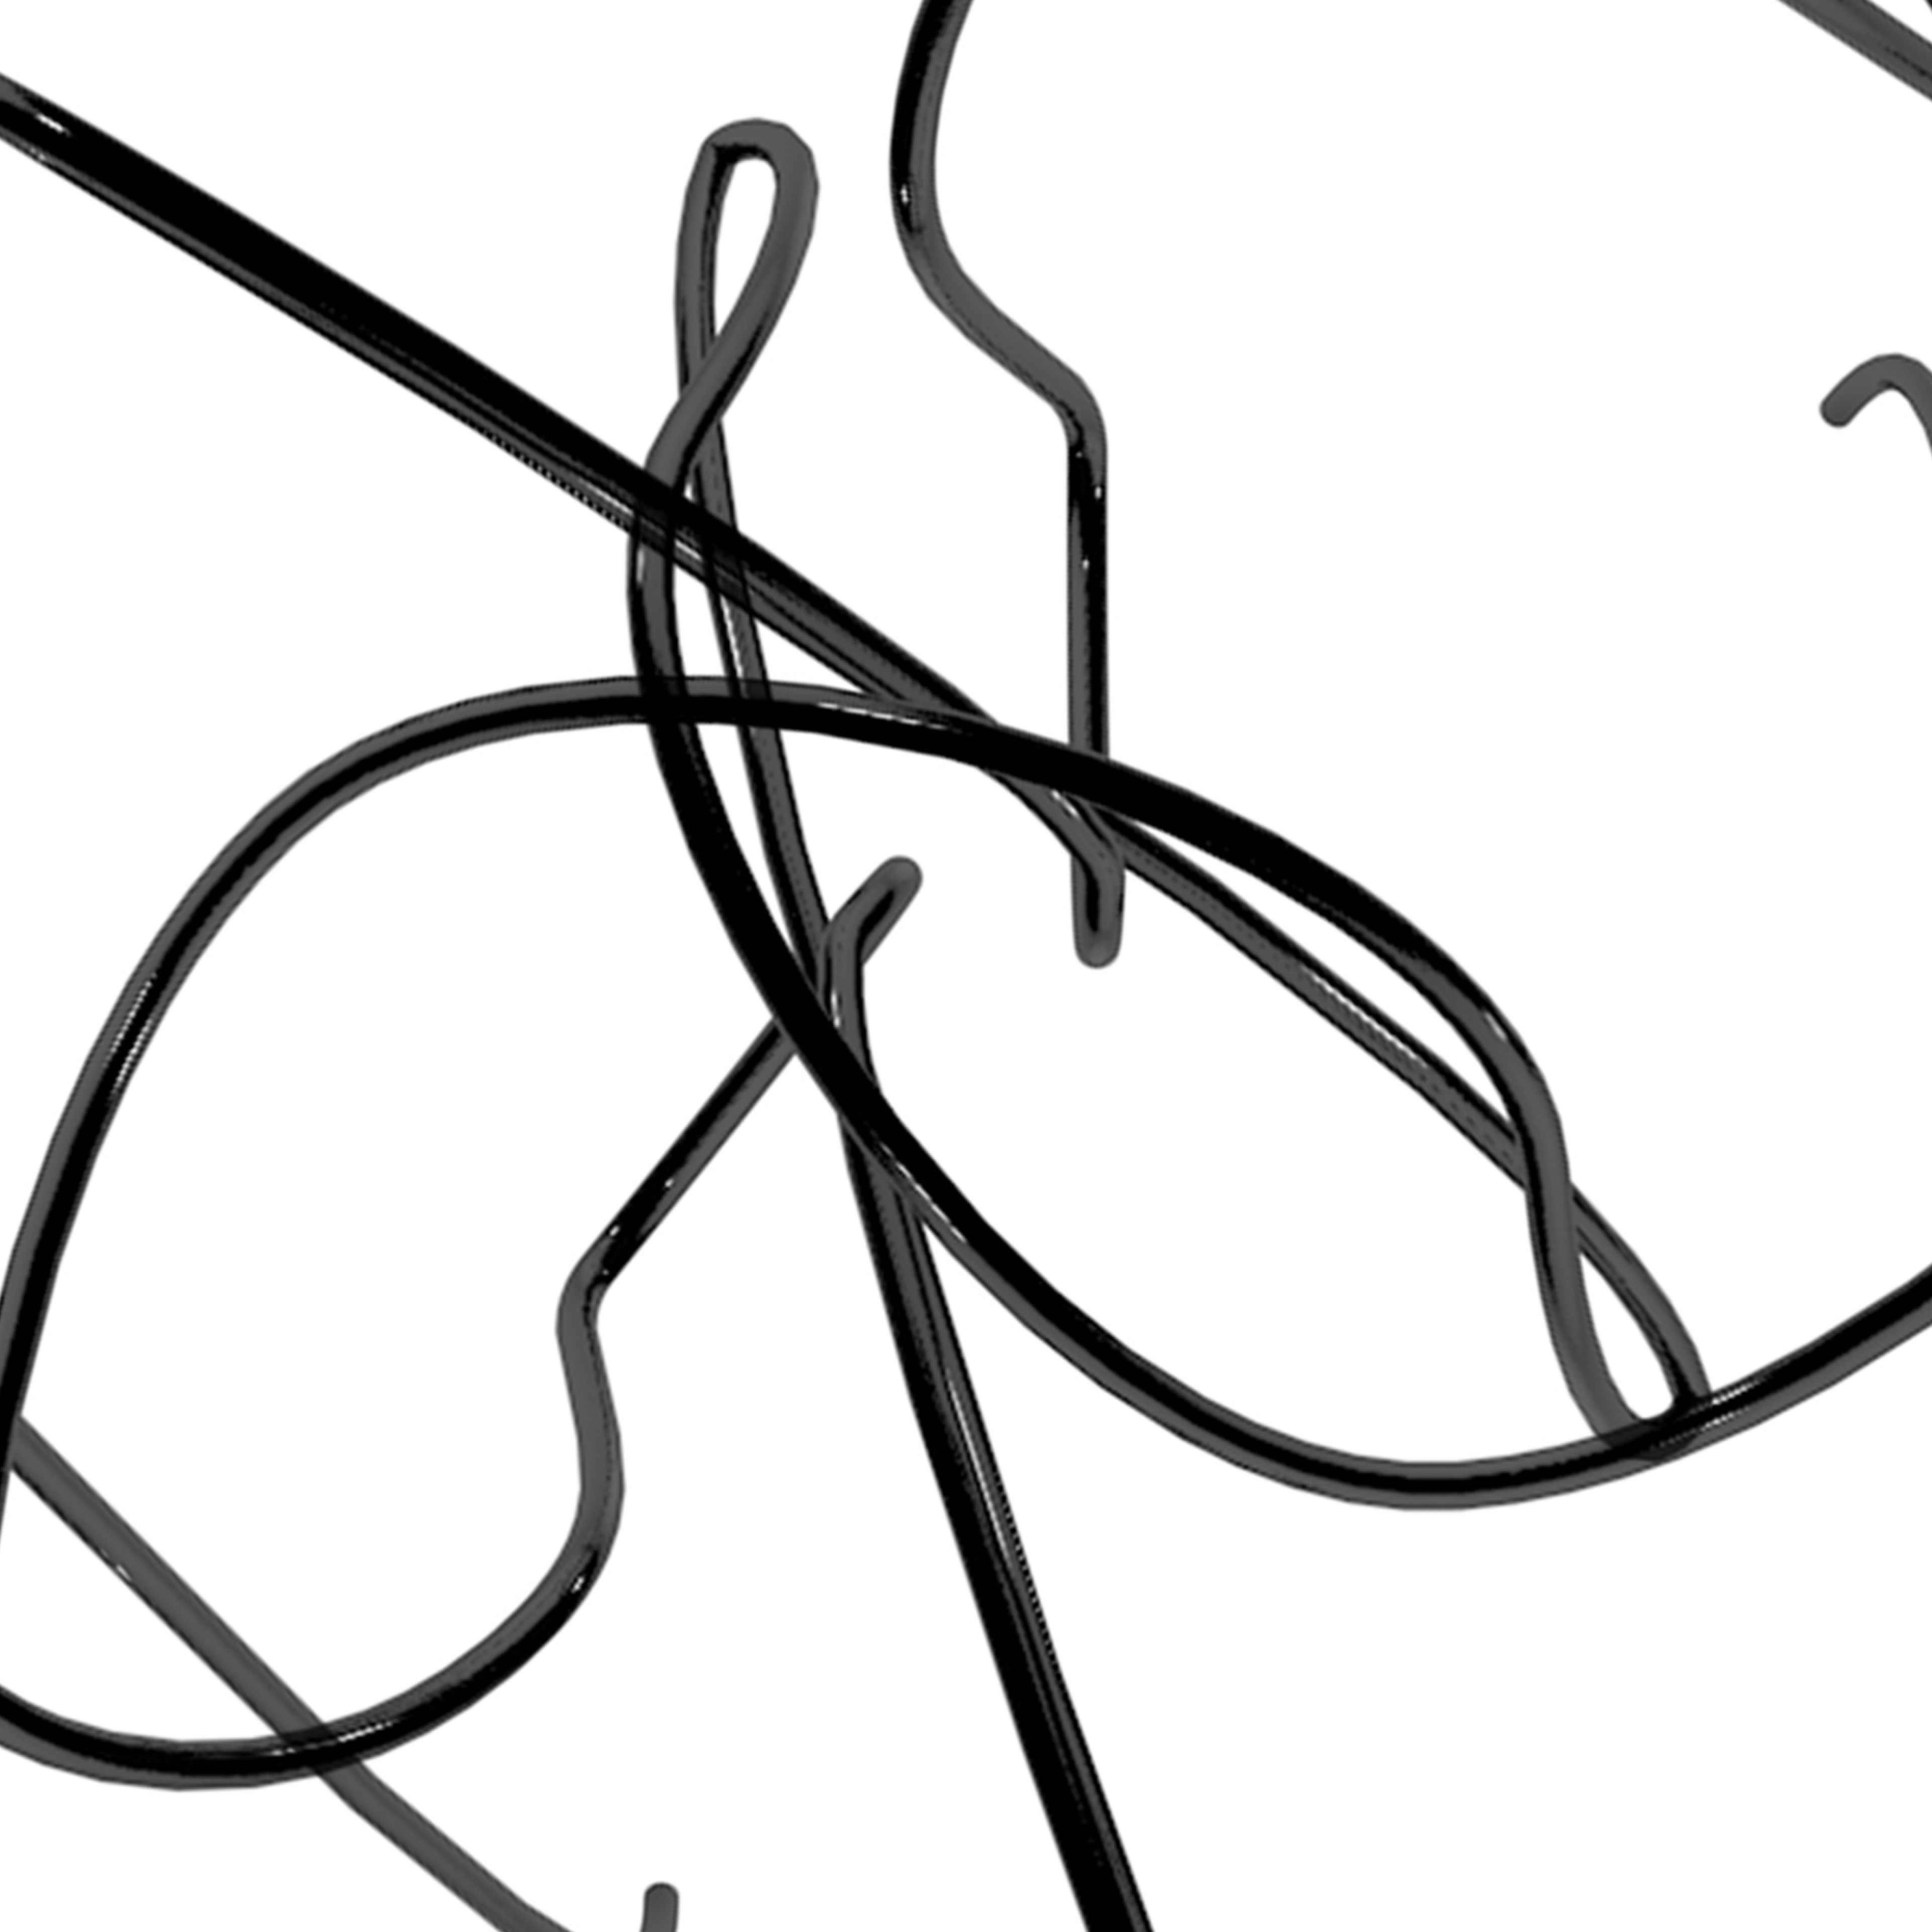 wire.png